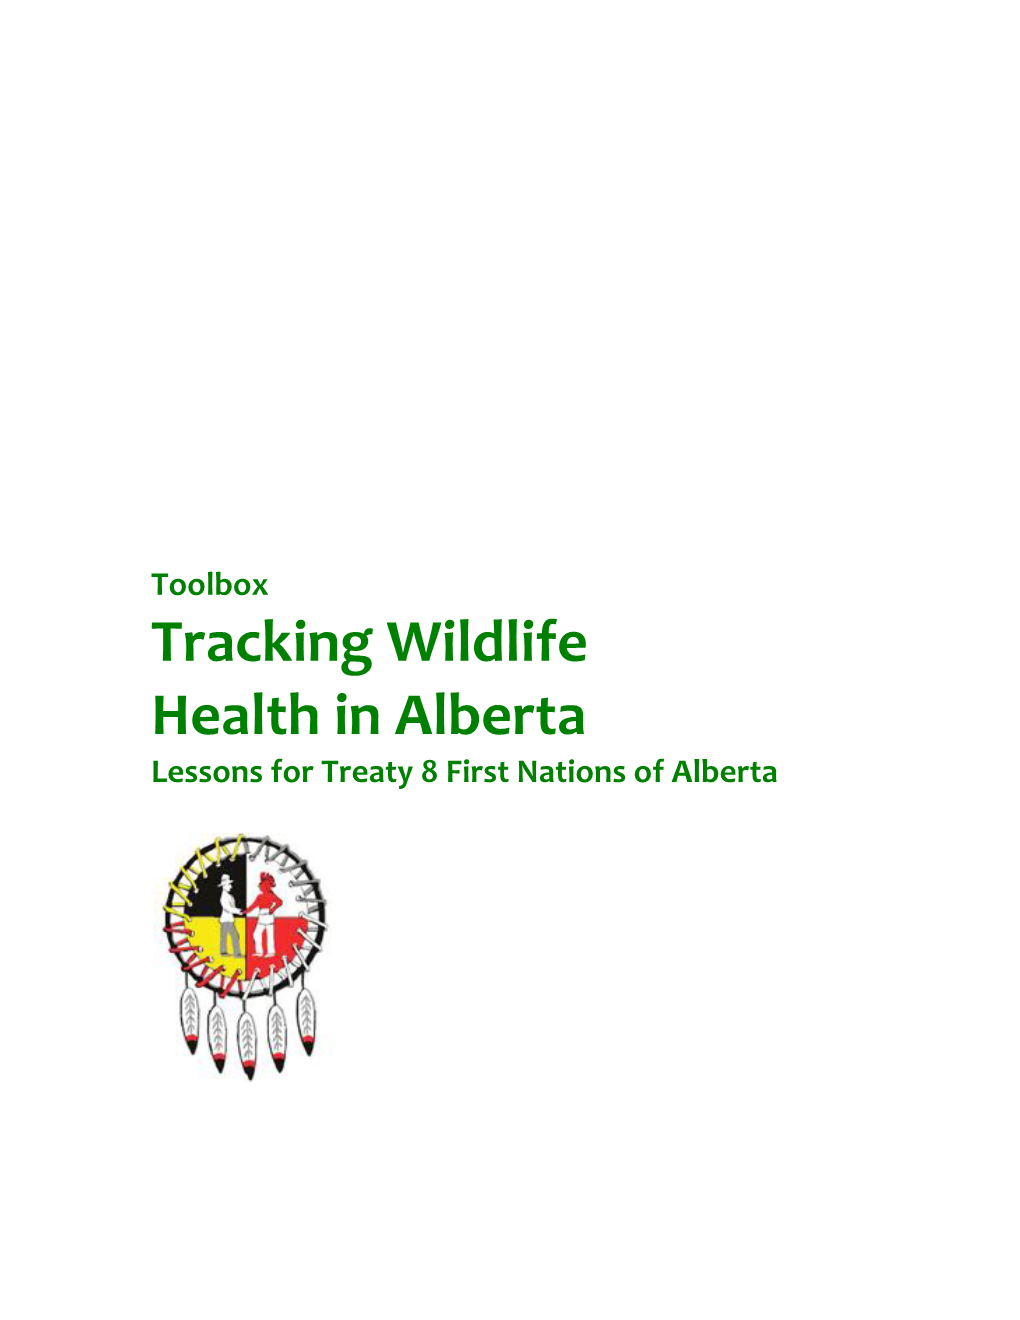 Toolbox Tracking Wildlife Health in Alberta Lessons for Treaty 8 First Nations of Alberta